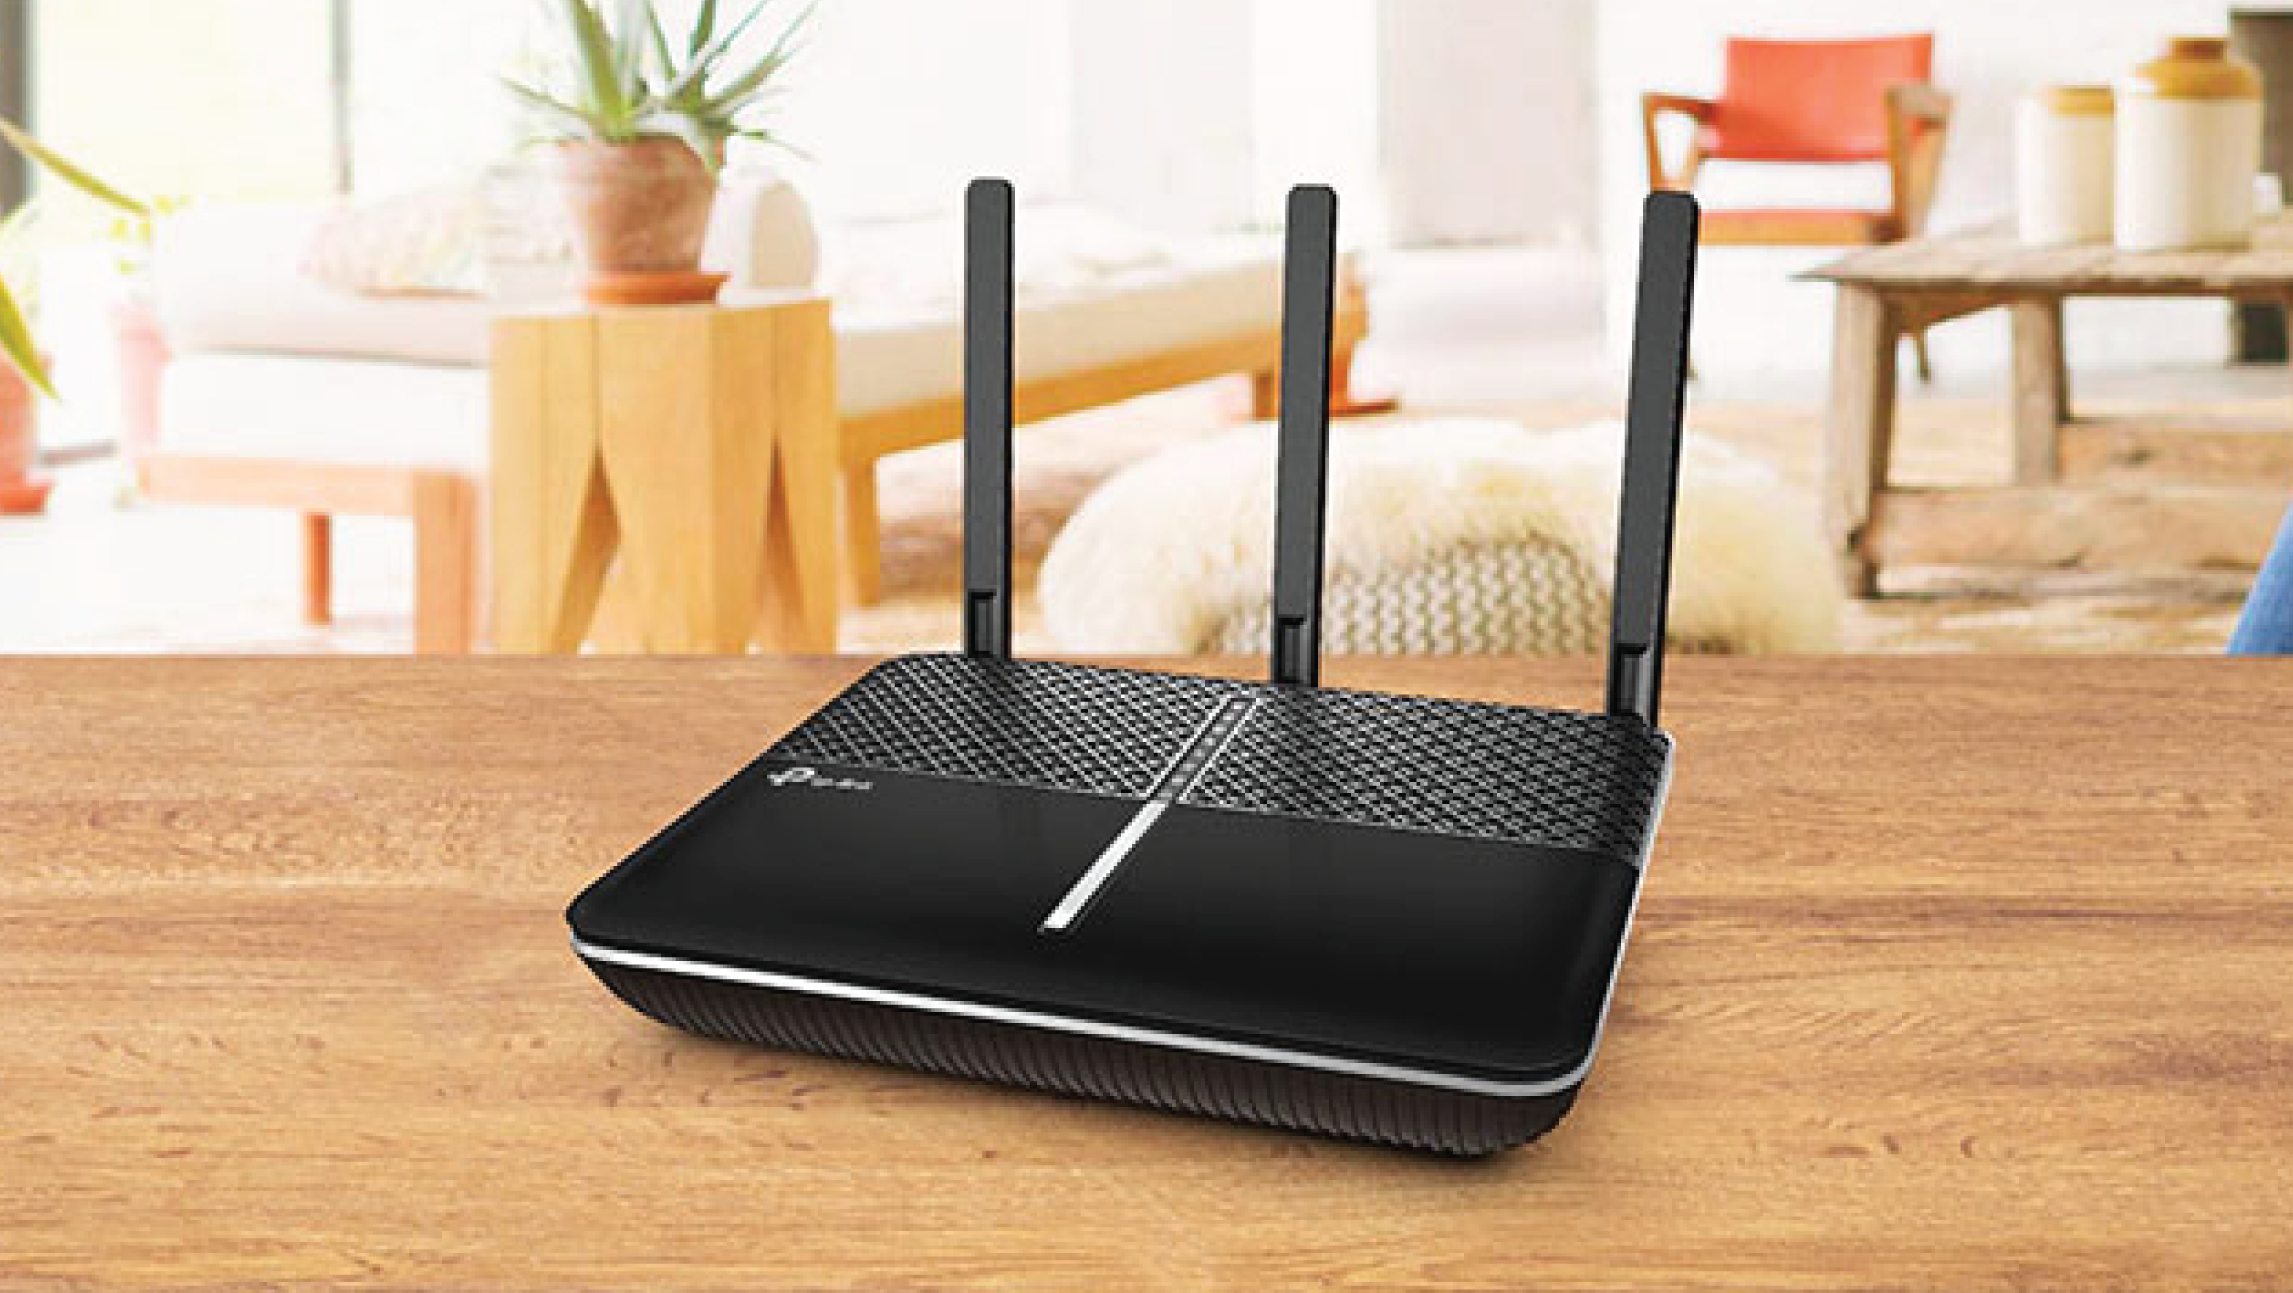 movox internet plans and modems from tp-link